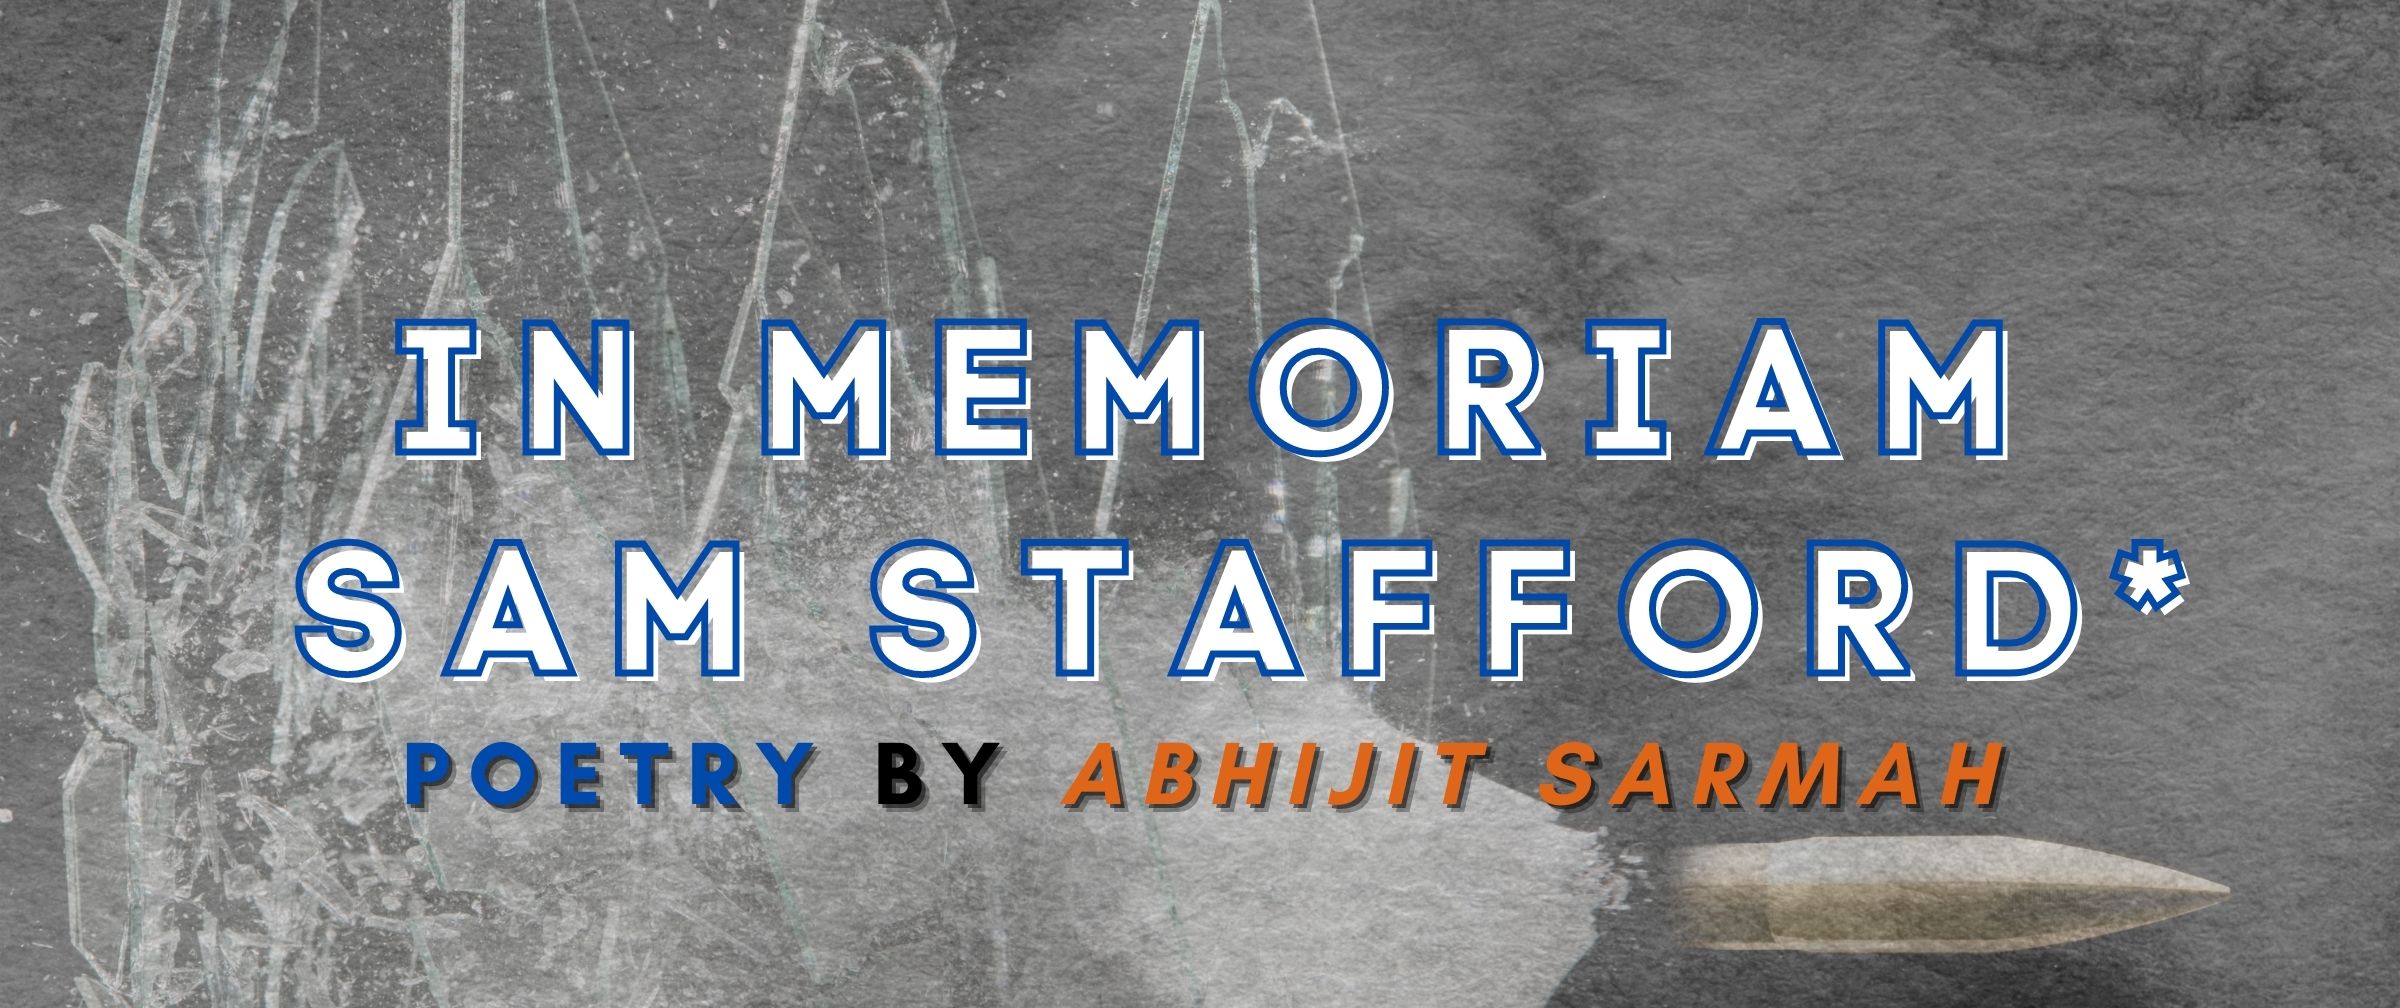 Graphic that reads In Memoriam Sam Stafford Poetry by Abhijit Sarmah